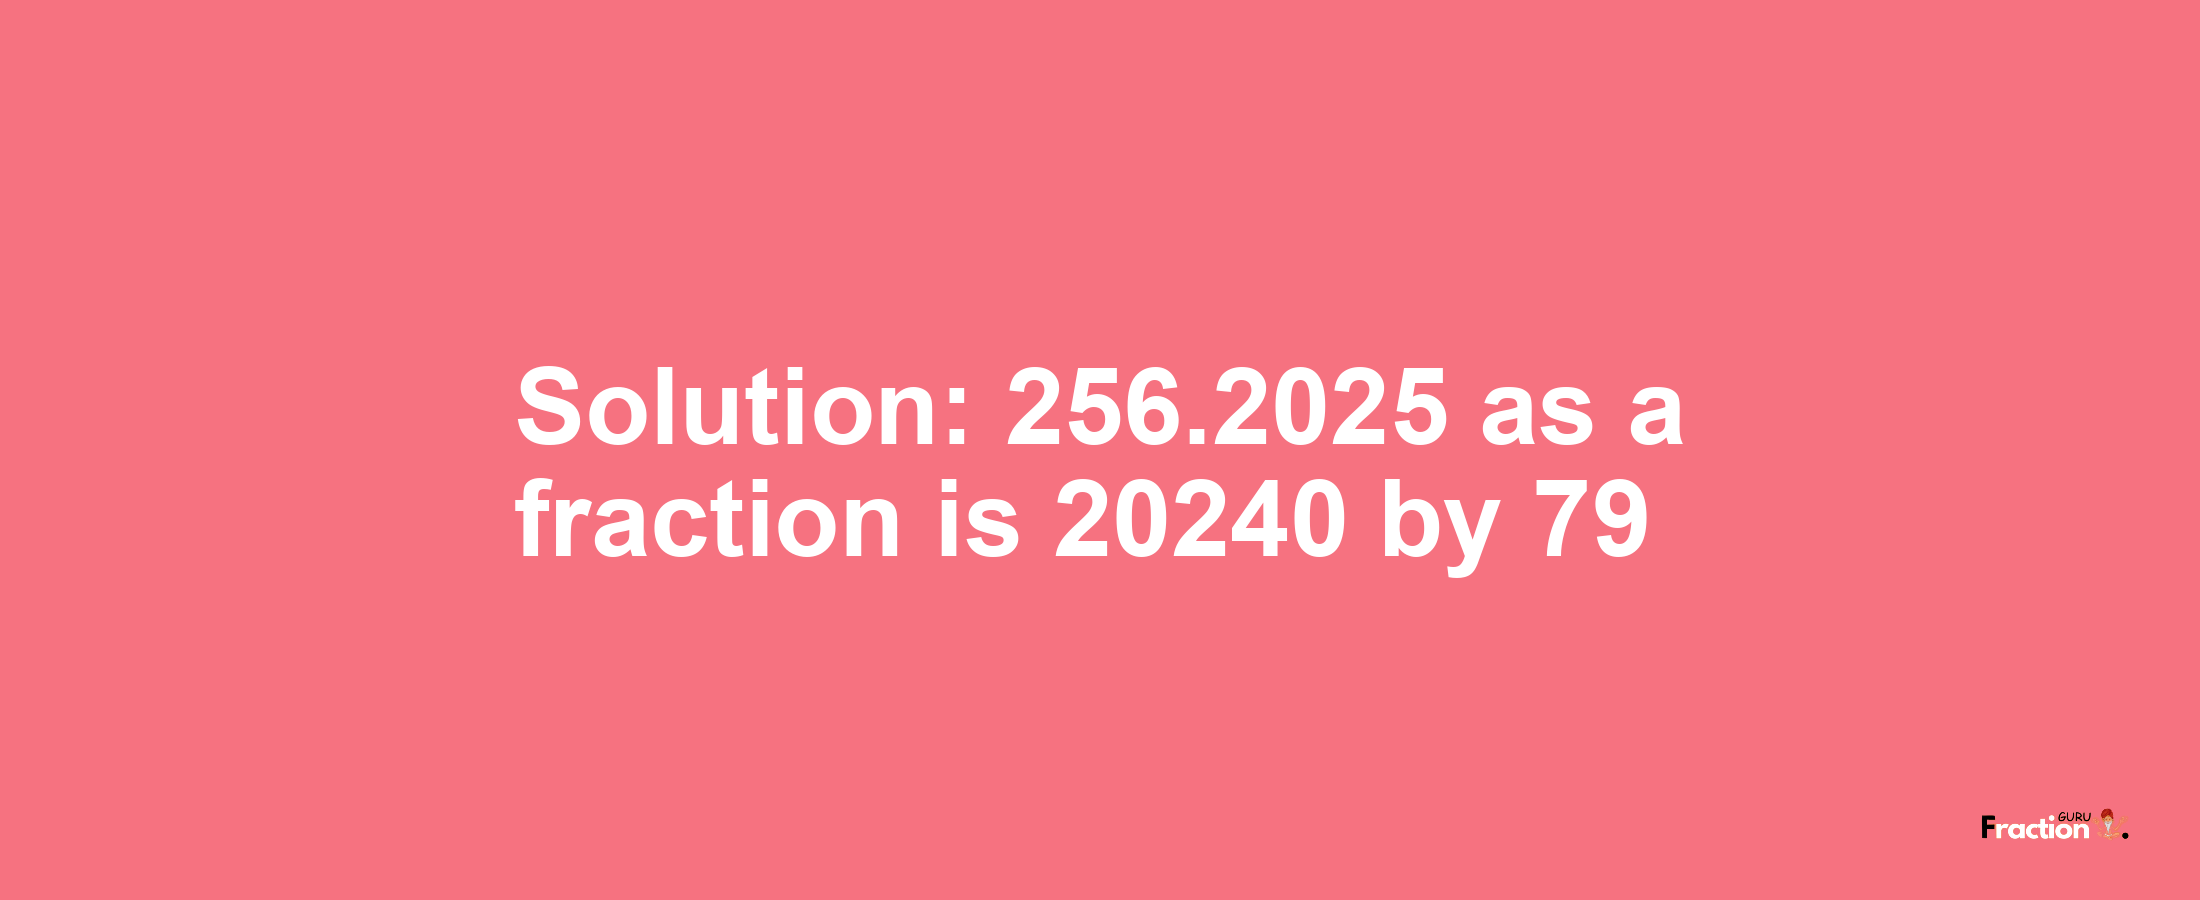 Solution:256.2025 as a fraction is 20240/79